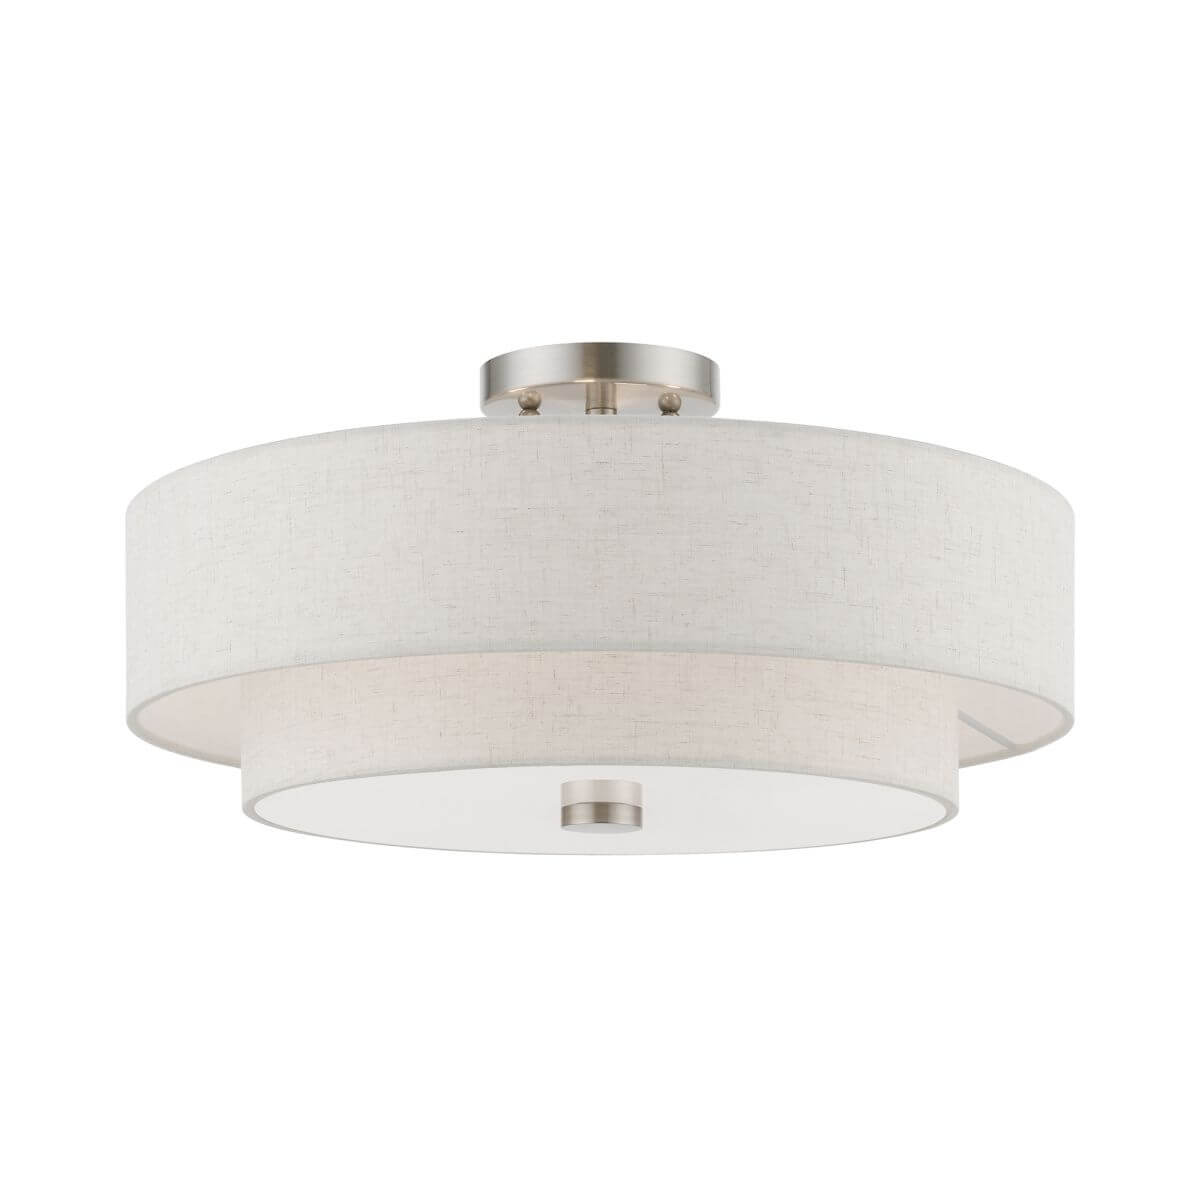 4 Light 18 inch Semi-Flush Mount in Brushed Nickel with Hand Crafted Oatmeal Color Hardback Fabric Shade - White Fabric Inside - 245467